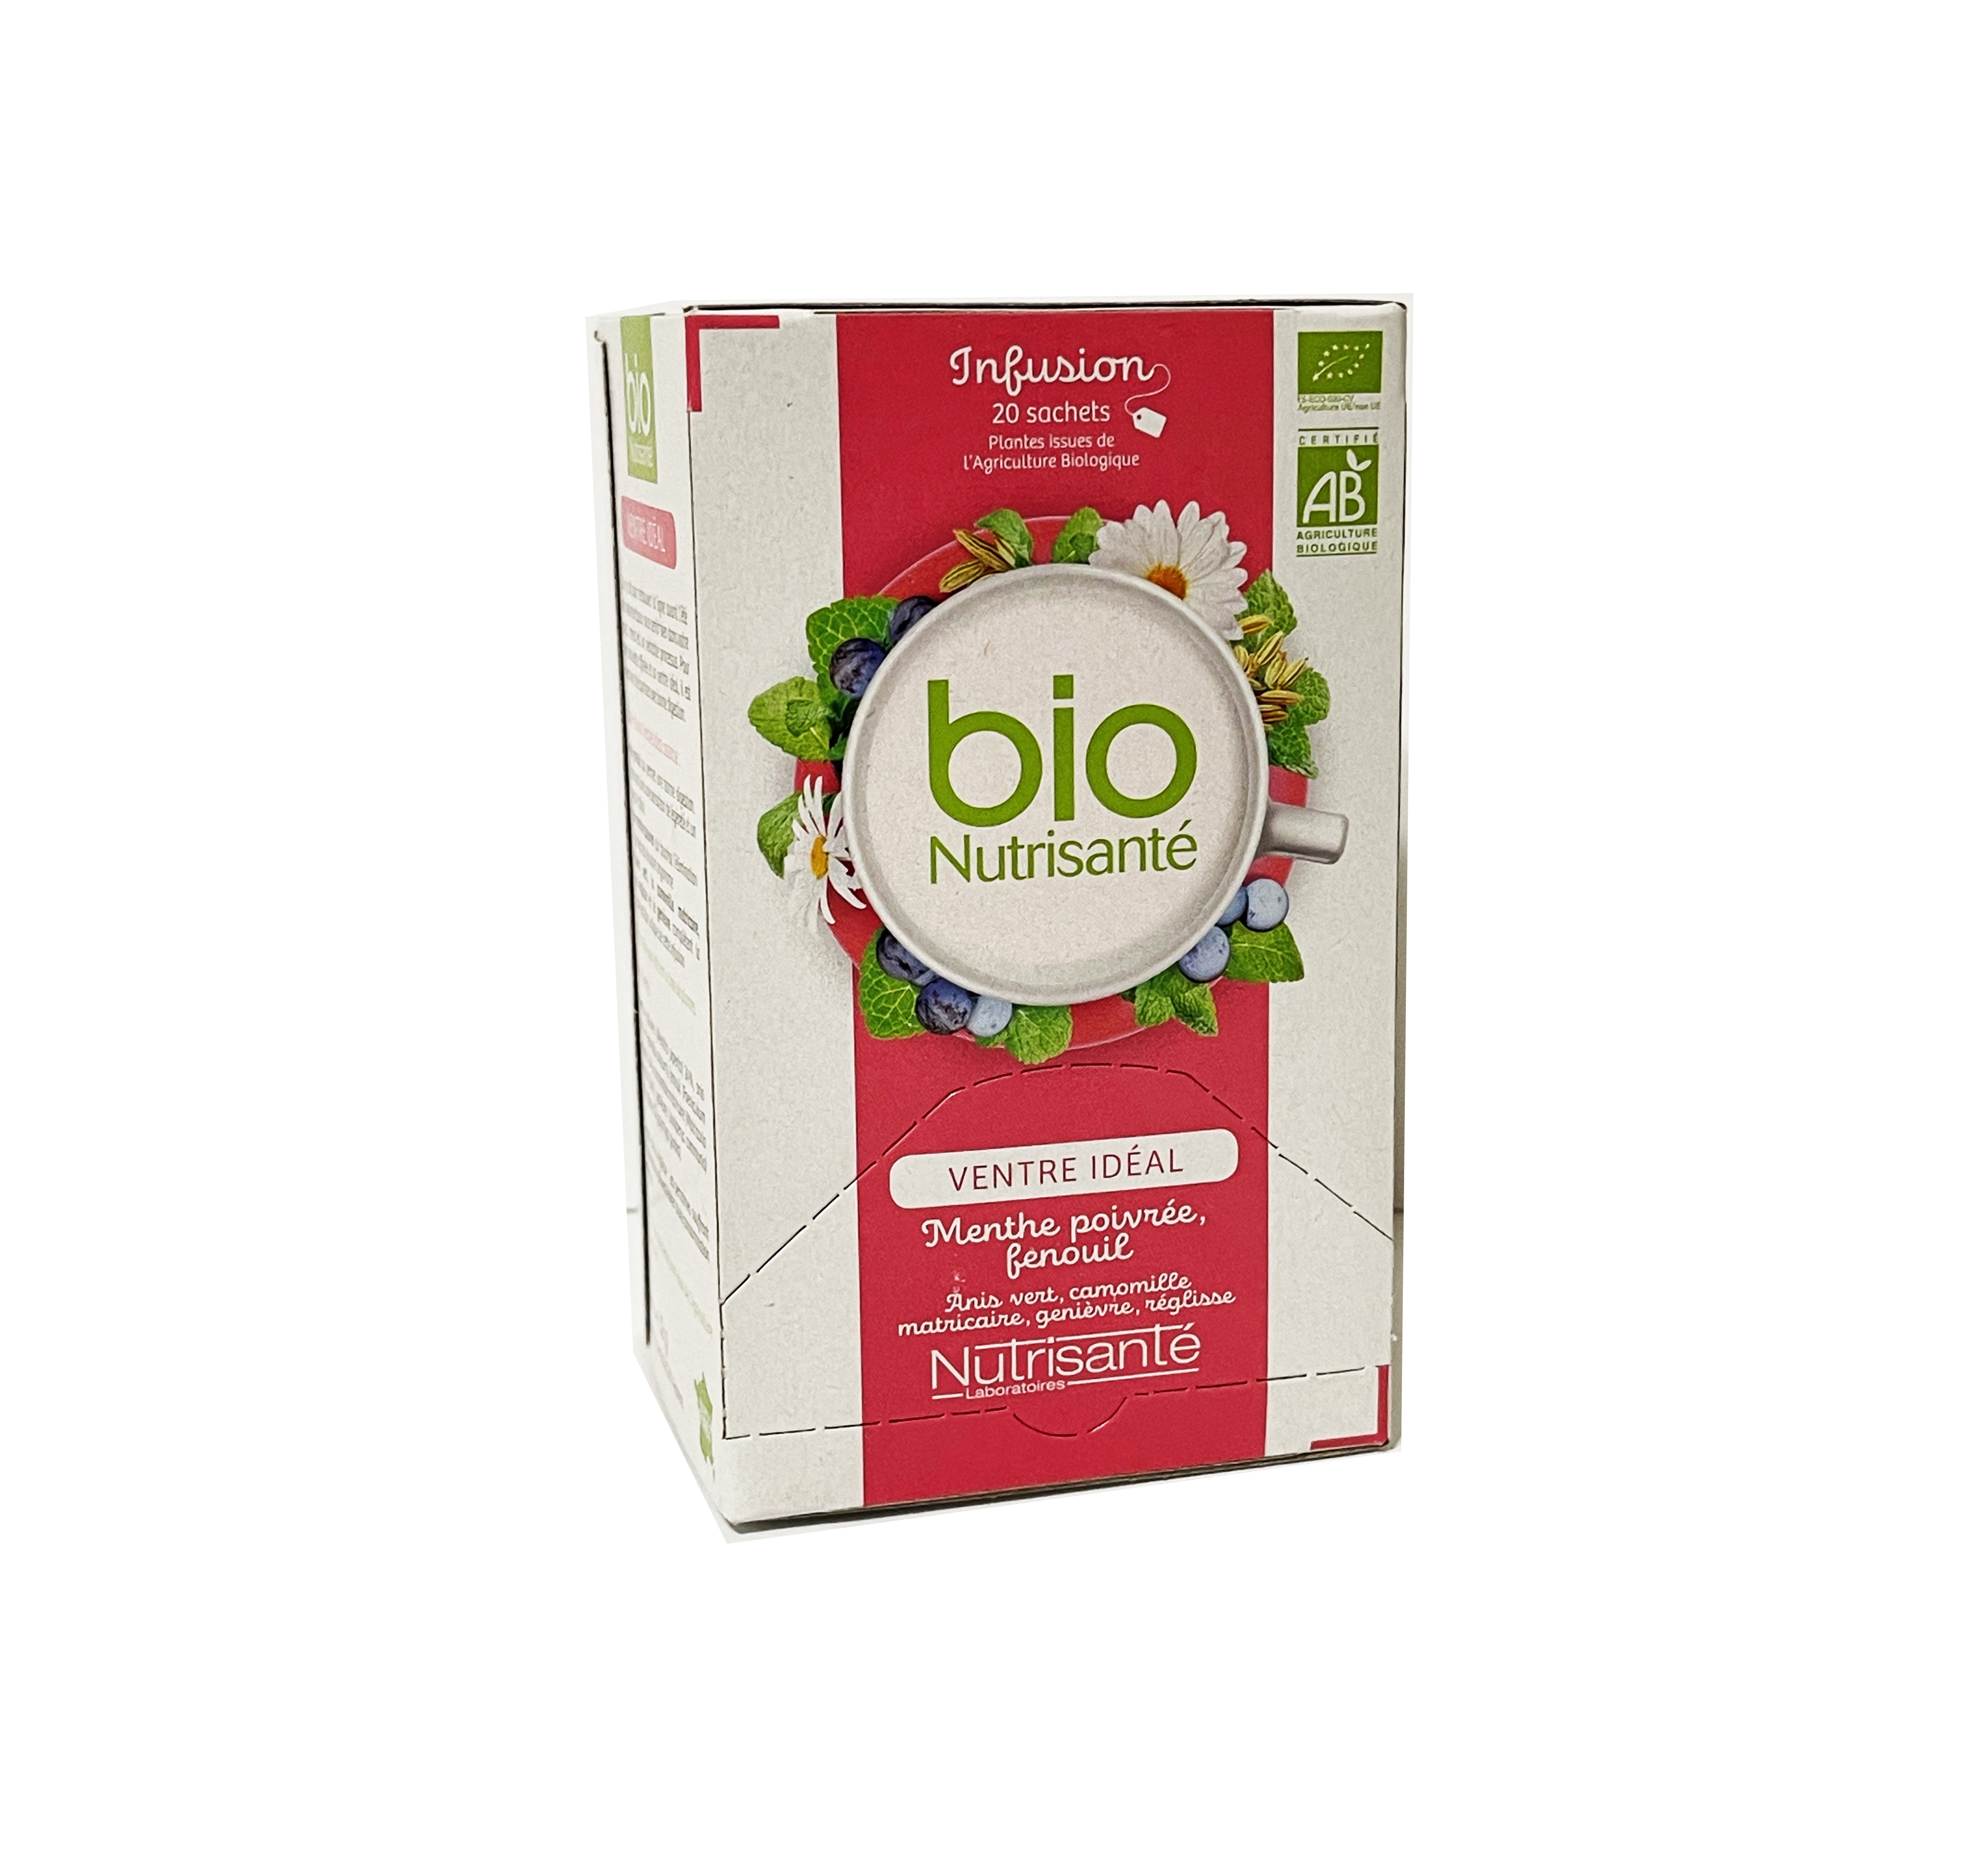 Buy Natural Flat Belly Tea online in the US pharmacy.